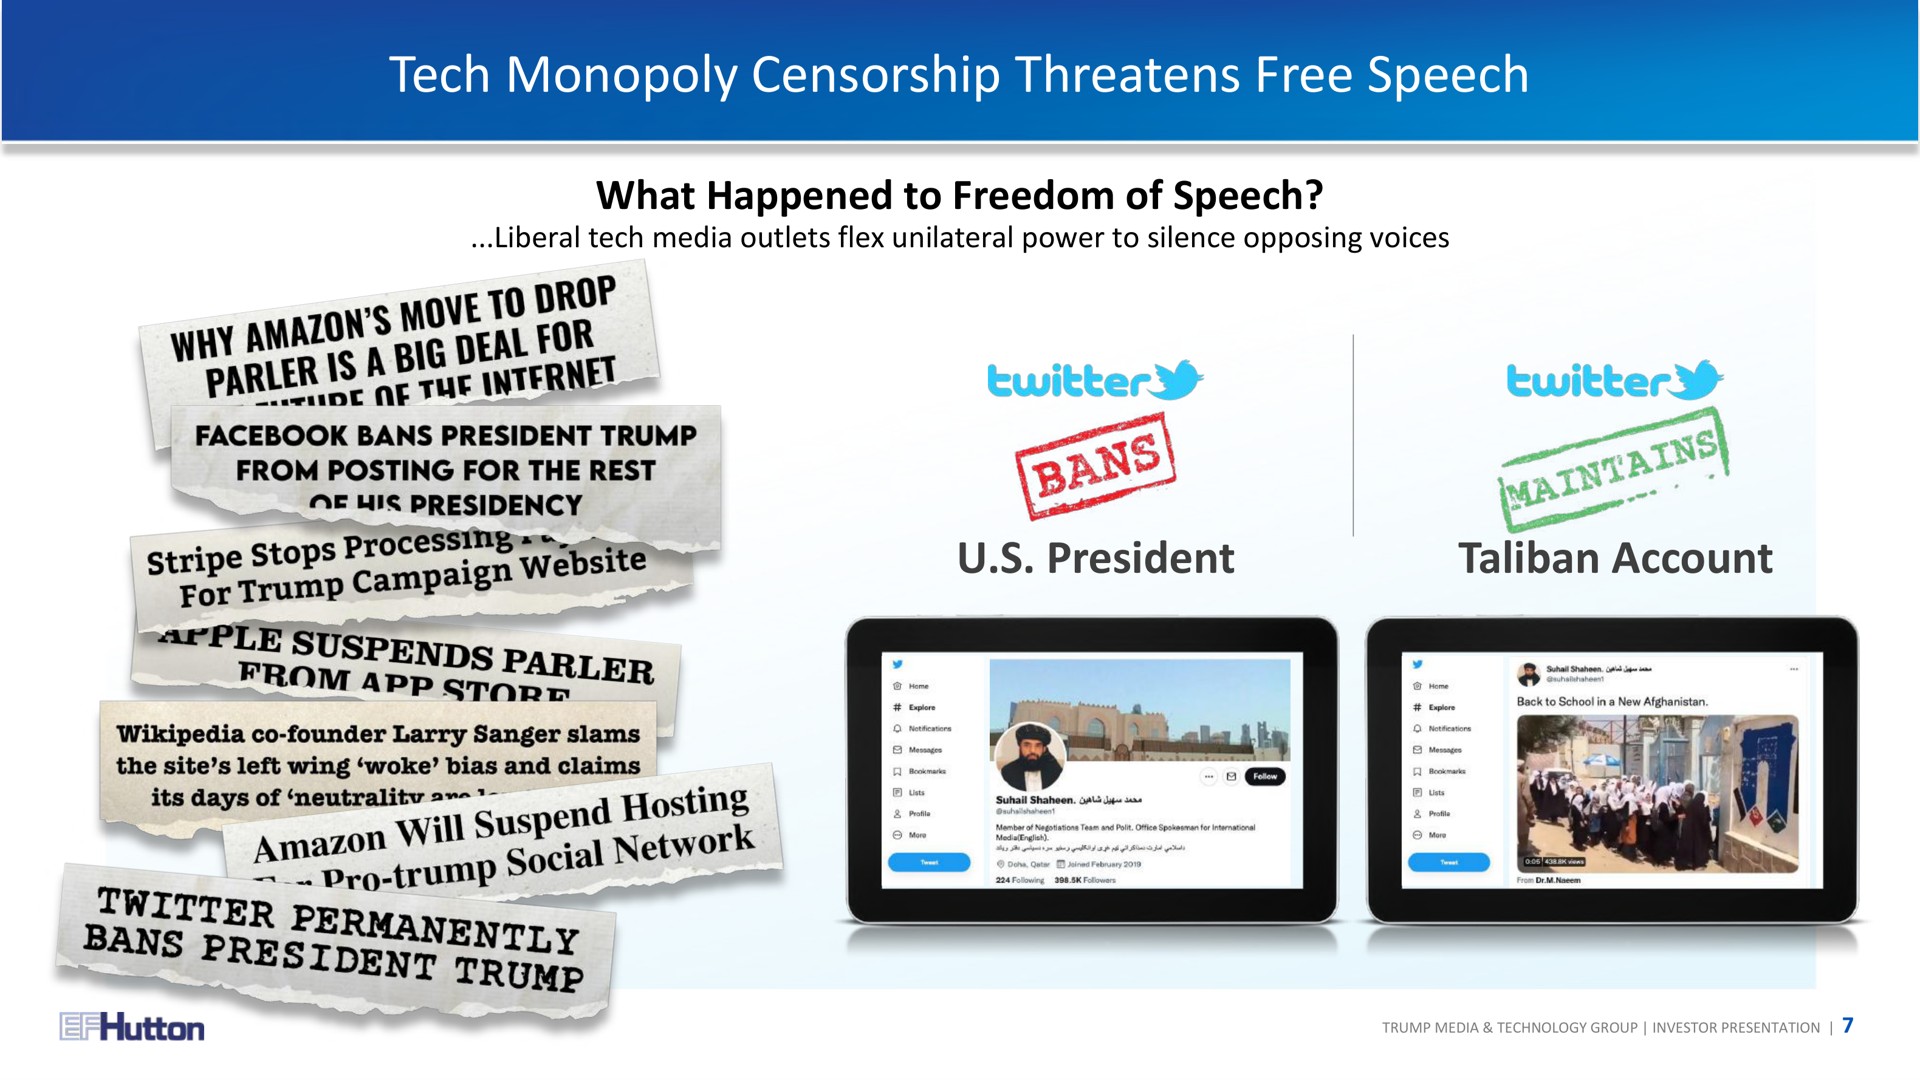 tech monopoly censorship threatens free speech president account move to drop why deal for the stipe tops campaign pan suspends from grant will suspend twitter permanent bans a work | TMTG